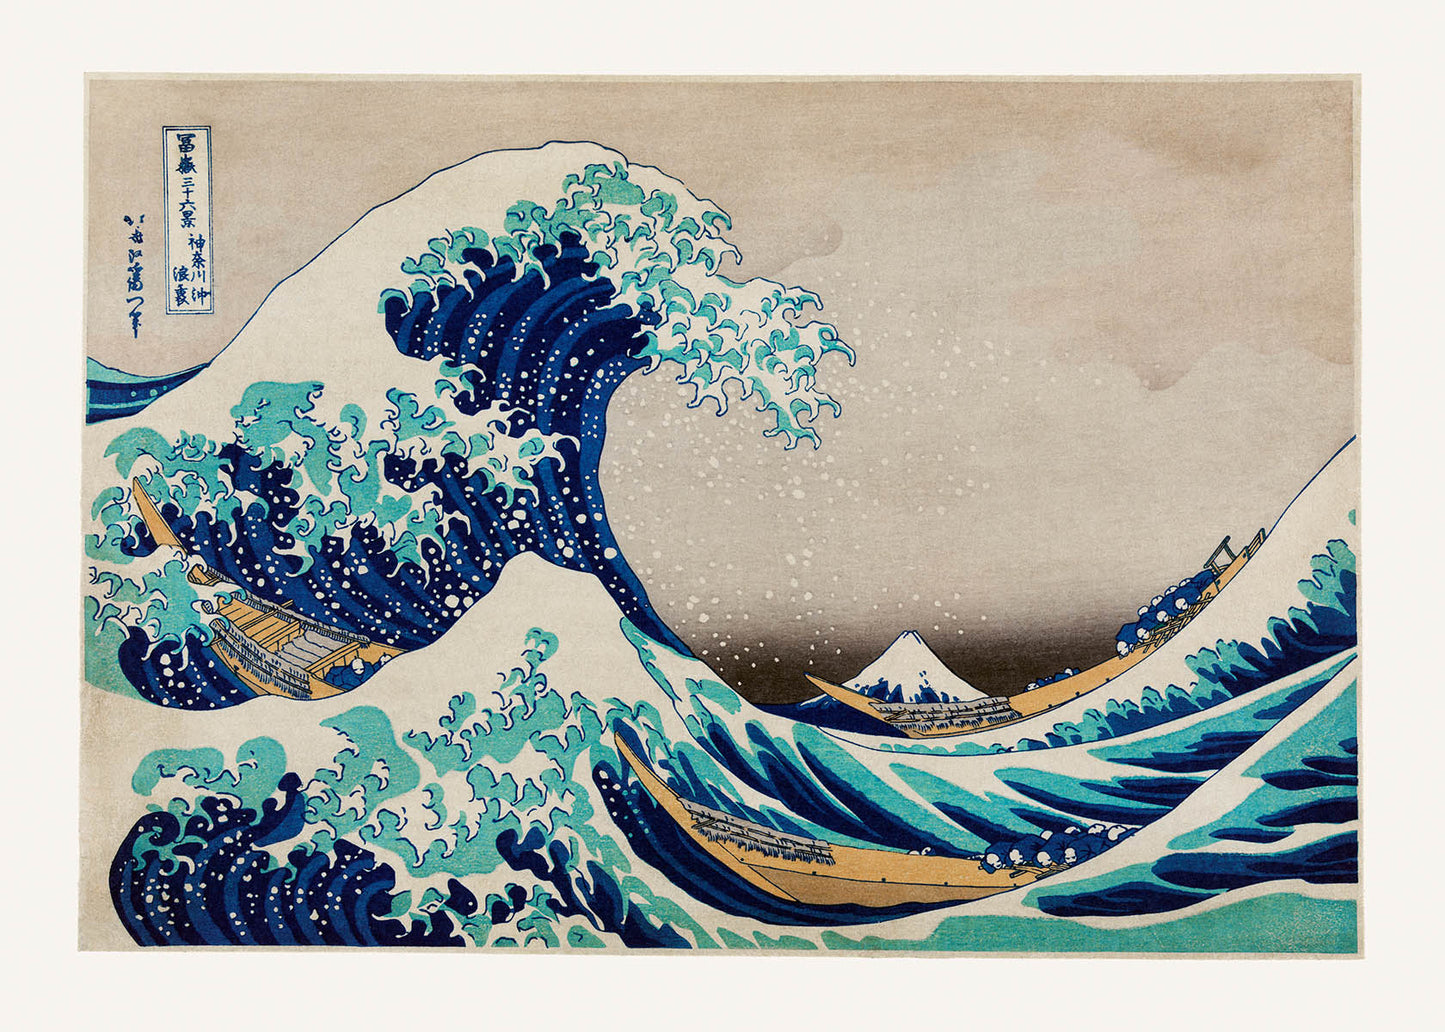 The Great Wave Poster - Kanagawa Wave Wall Art of Hokusai Japanese Poster  Canvas Prints & Wall Art Wave Japanese Poster for Home Decoration Office